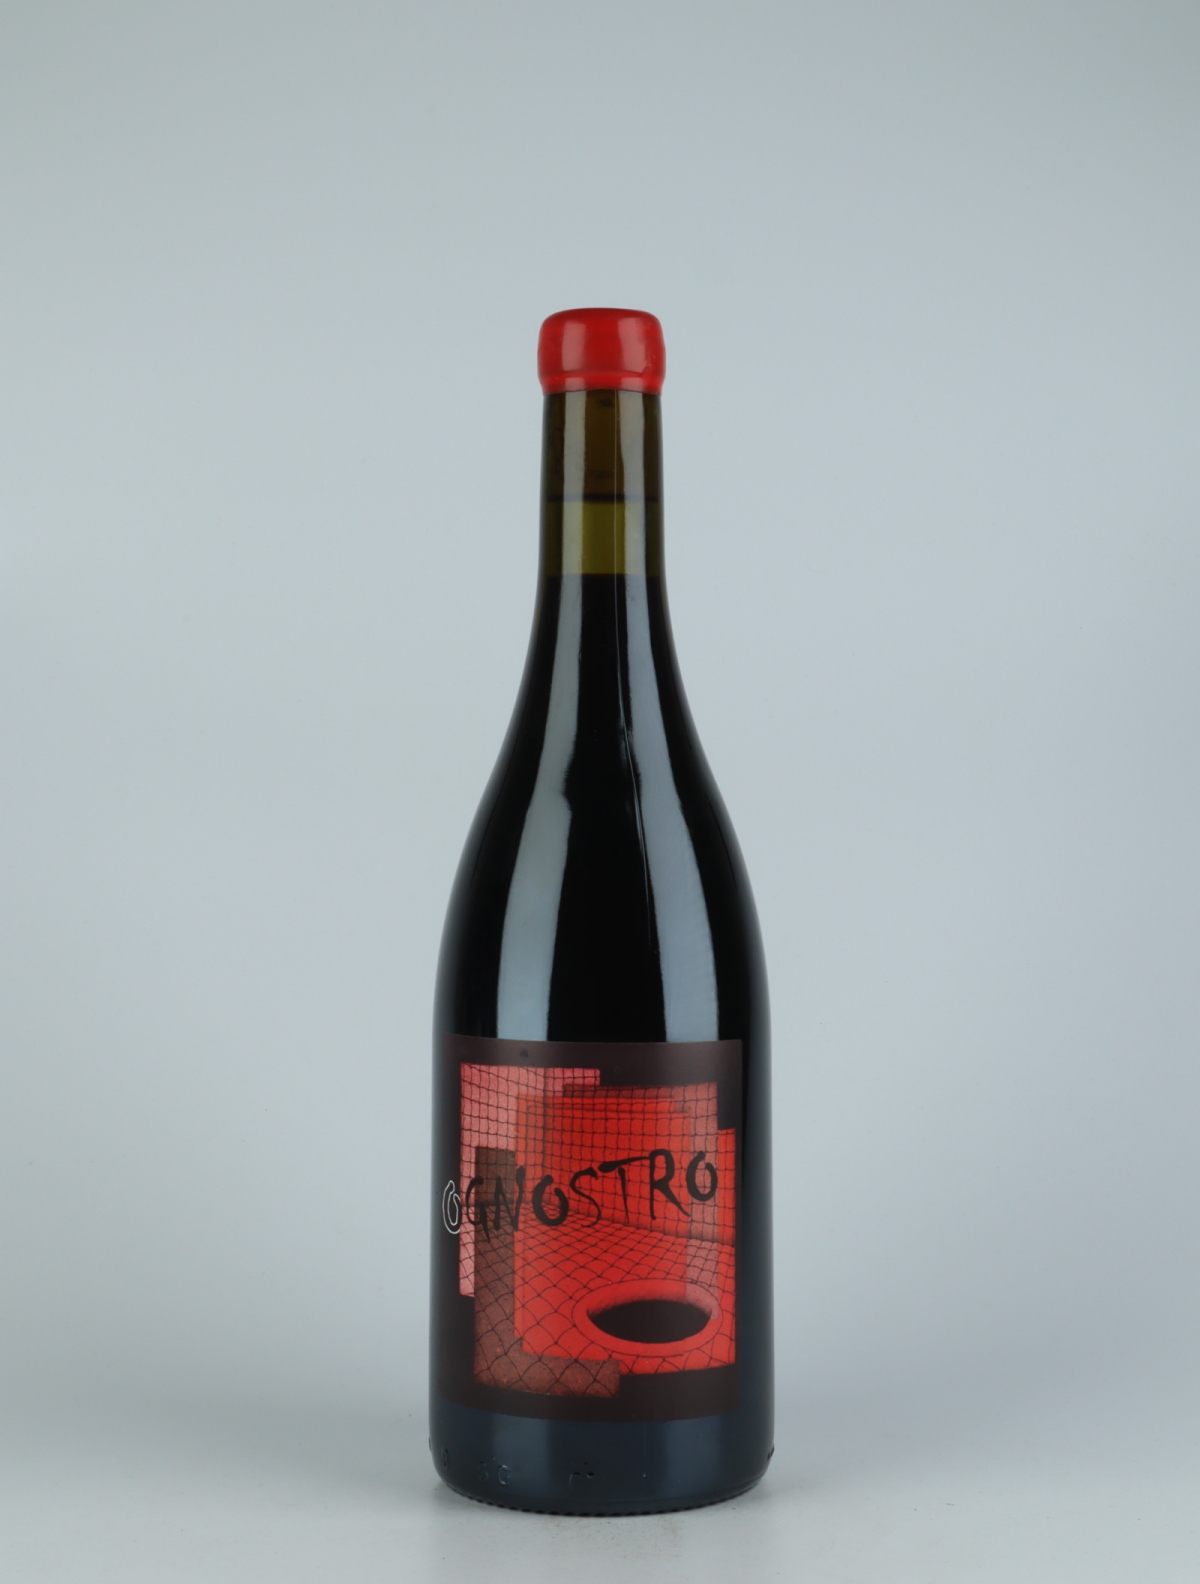 A bottle 2018 Ognostro Rosso Red wine from Marco Tinessa, Campania in Italy